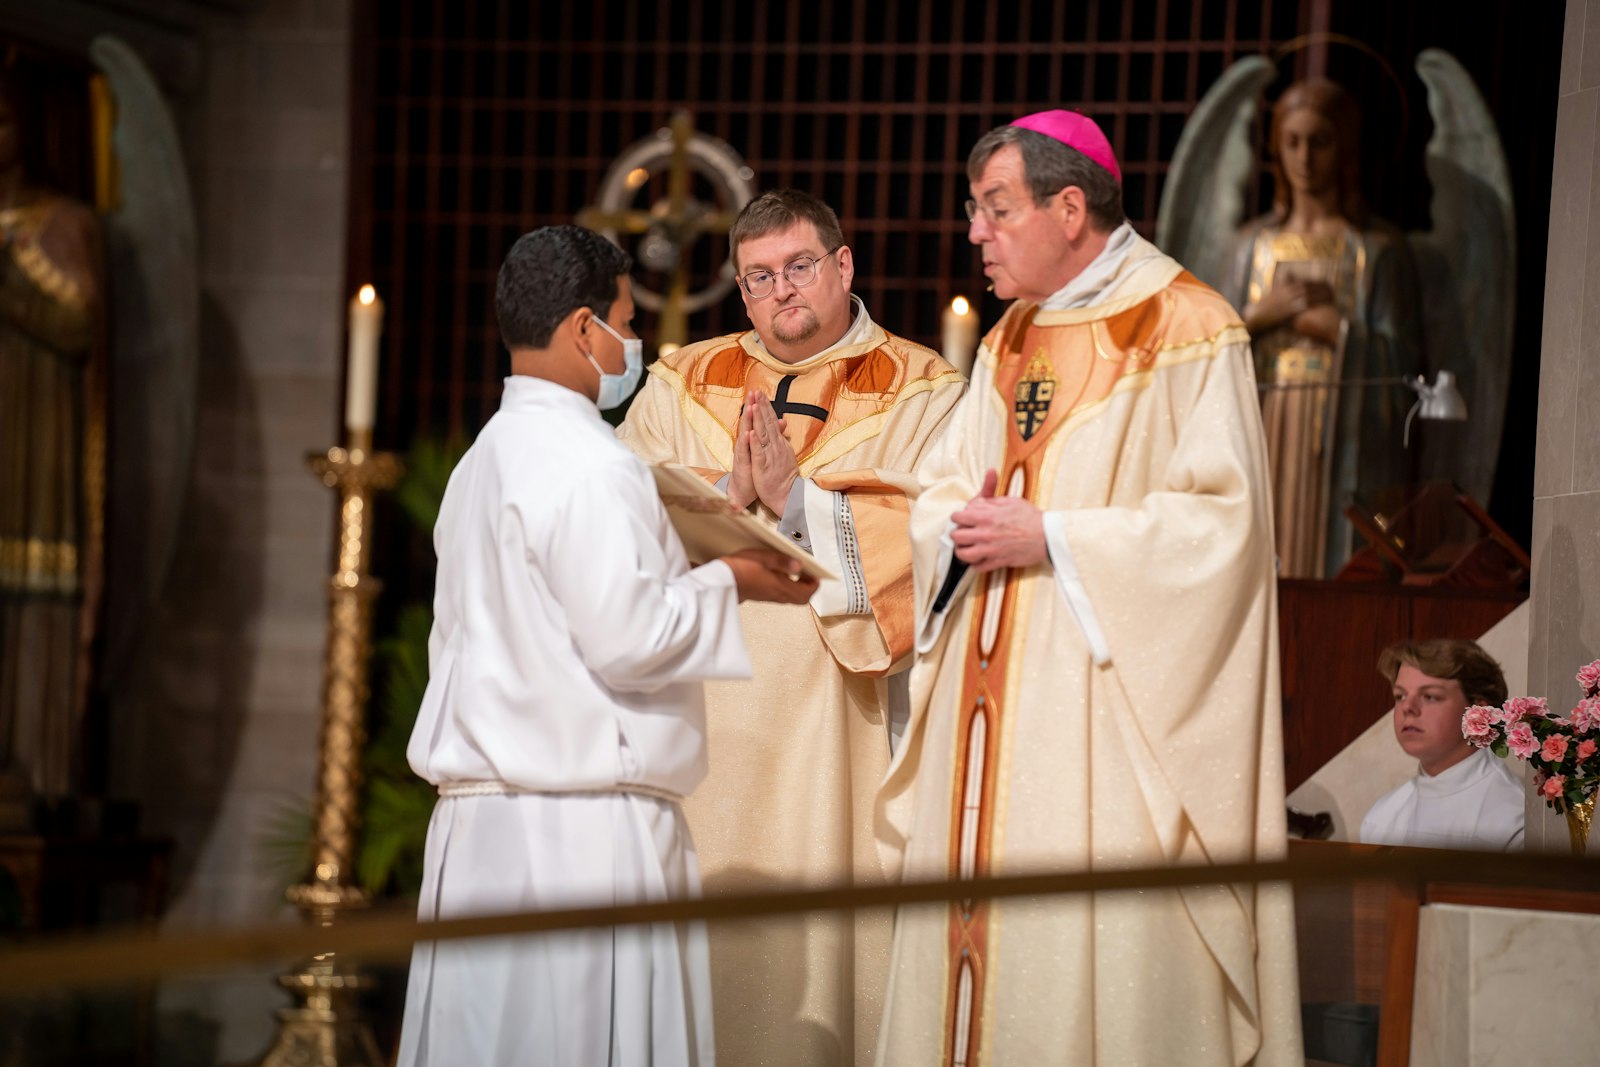 Deacon Sean Costello, center, assists Archbishop Allen H. Vigneron during a rescheduled "Catholic Schools Week" Mass on April 27 at the Cathedral of the Most Blessed Sacrament in Detroit. Archbishop Vigneron introduced Deacon Costello as the Archdiocese of Detroit's new superintendent of Catholic schools during the Mass.